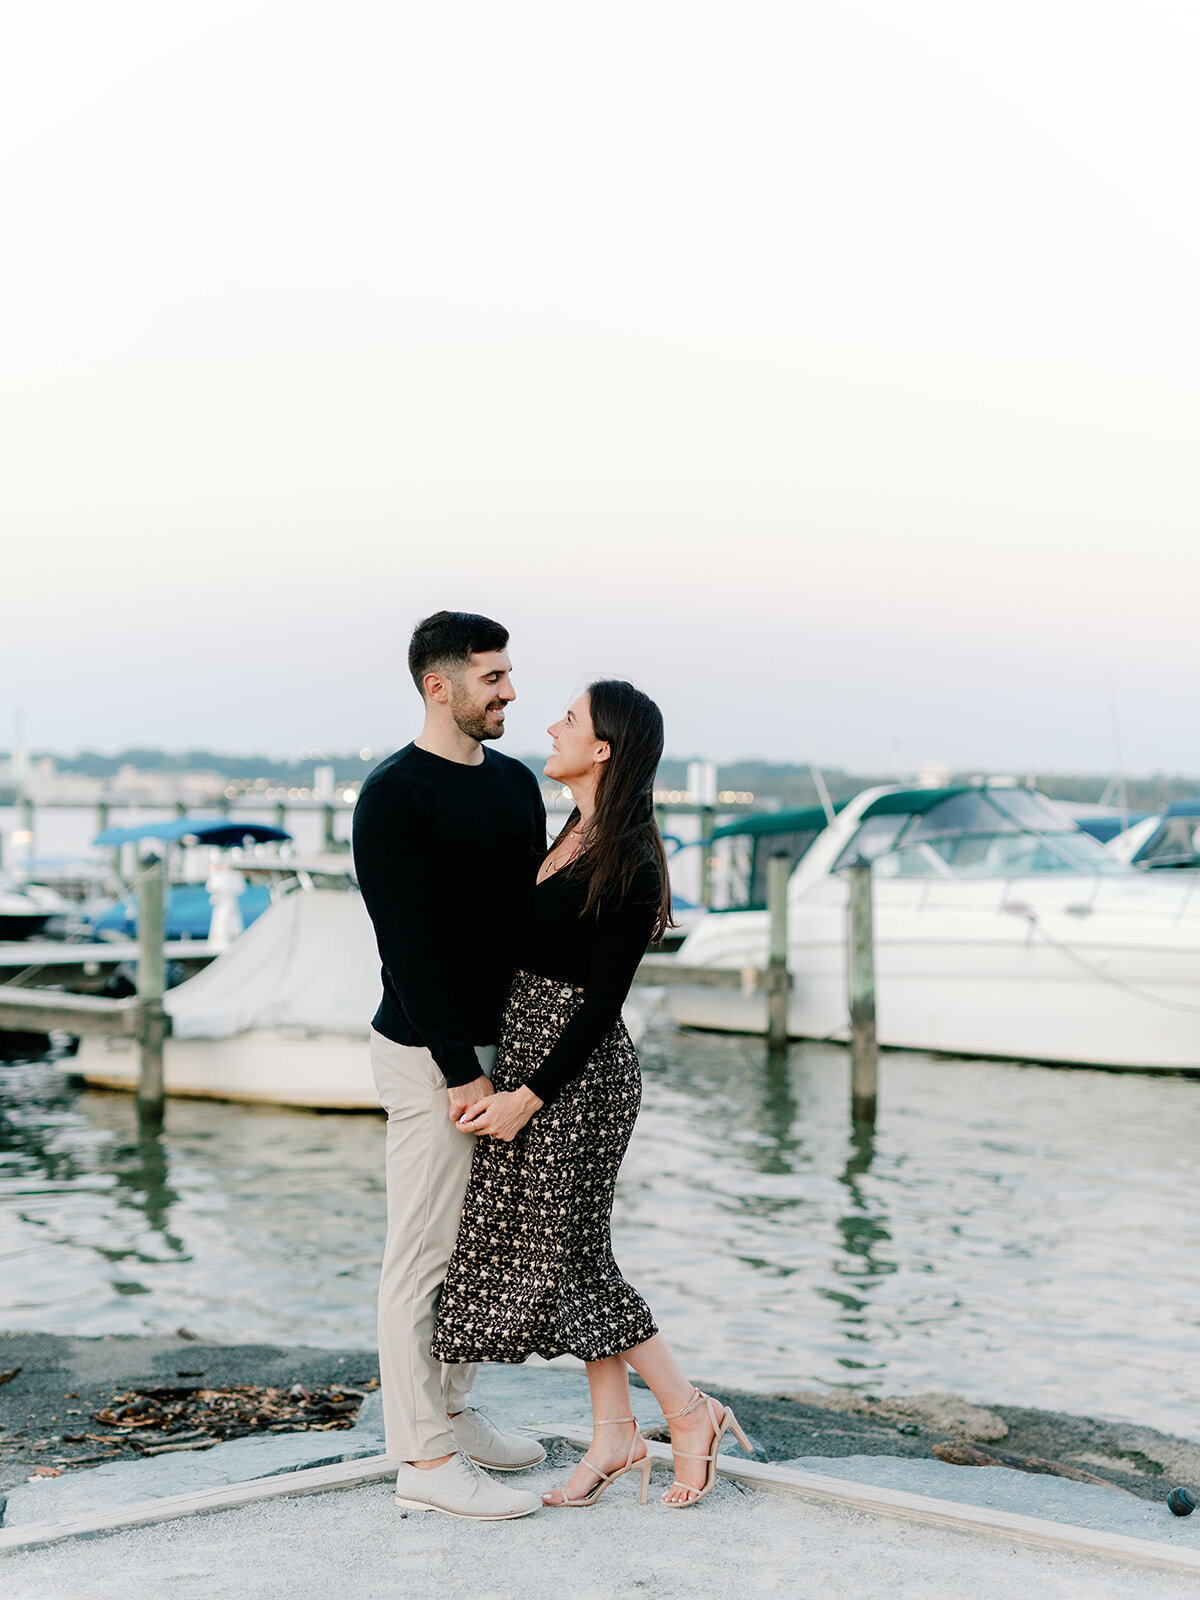 couple in front of the pier with boats in the background